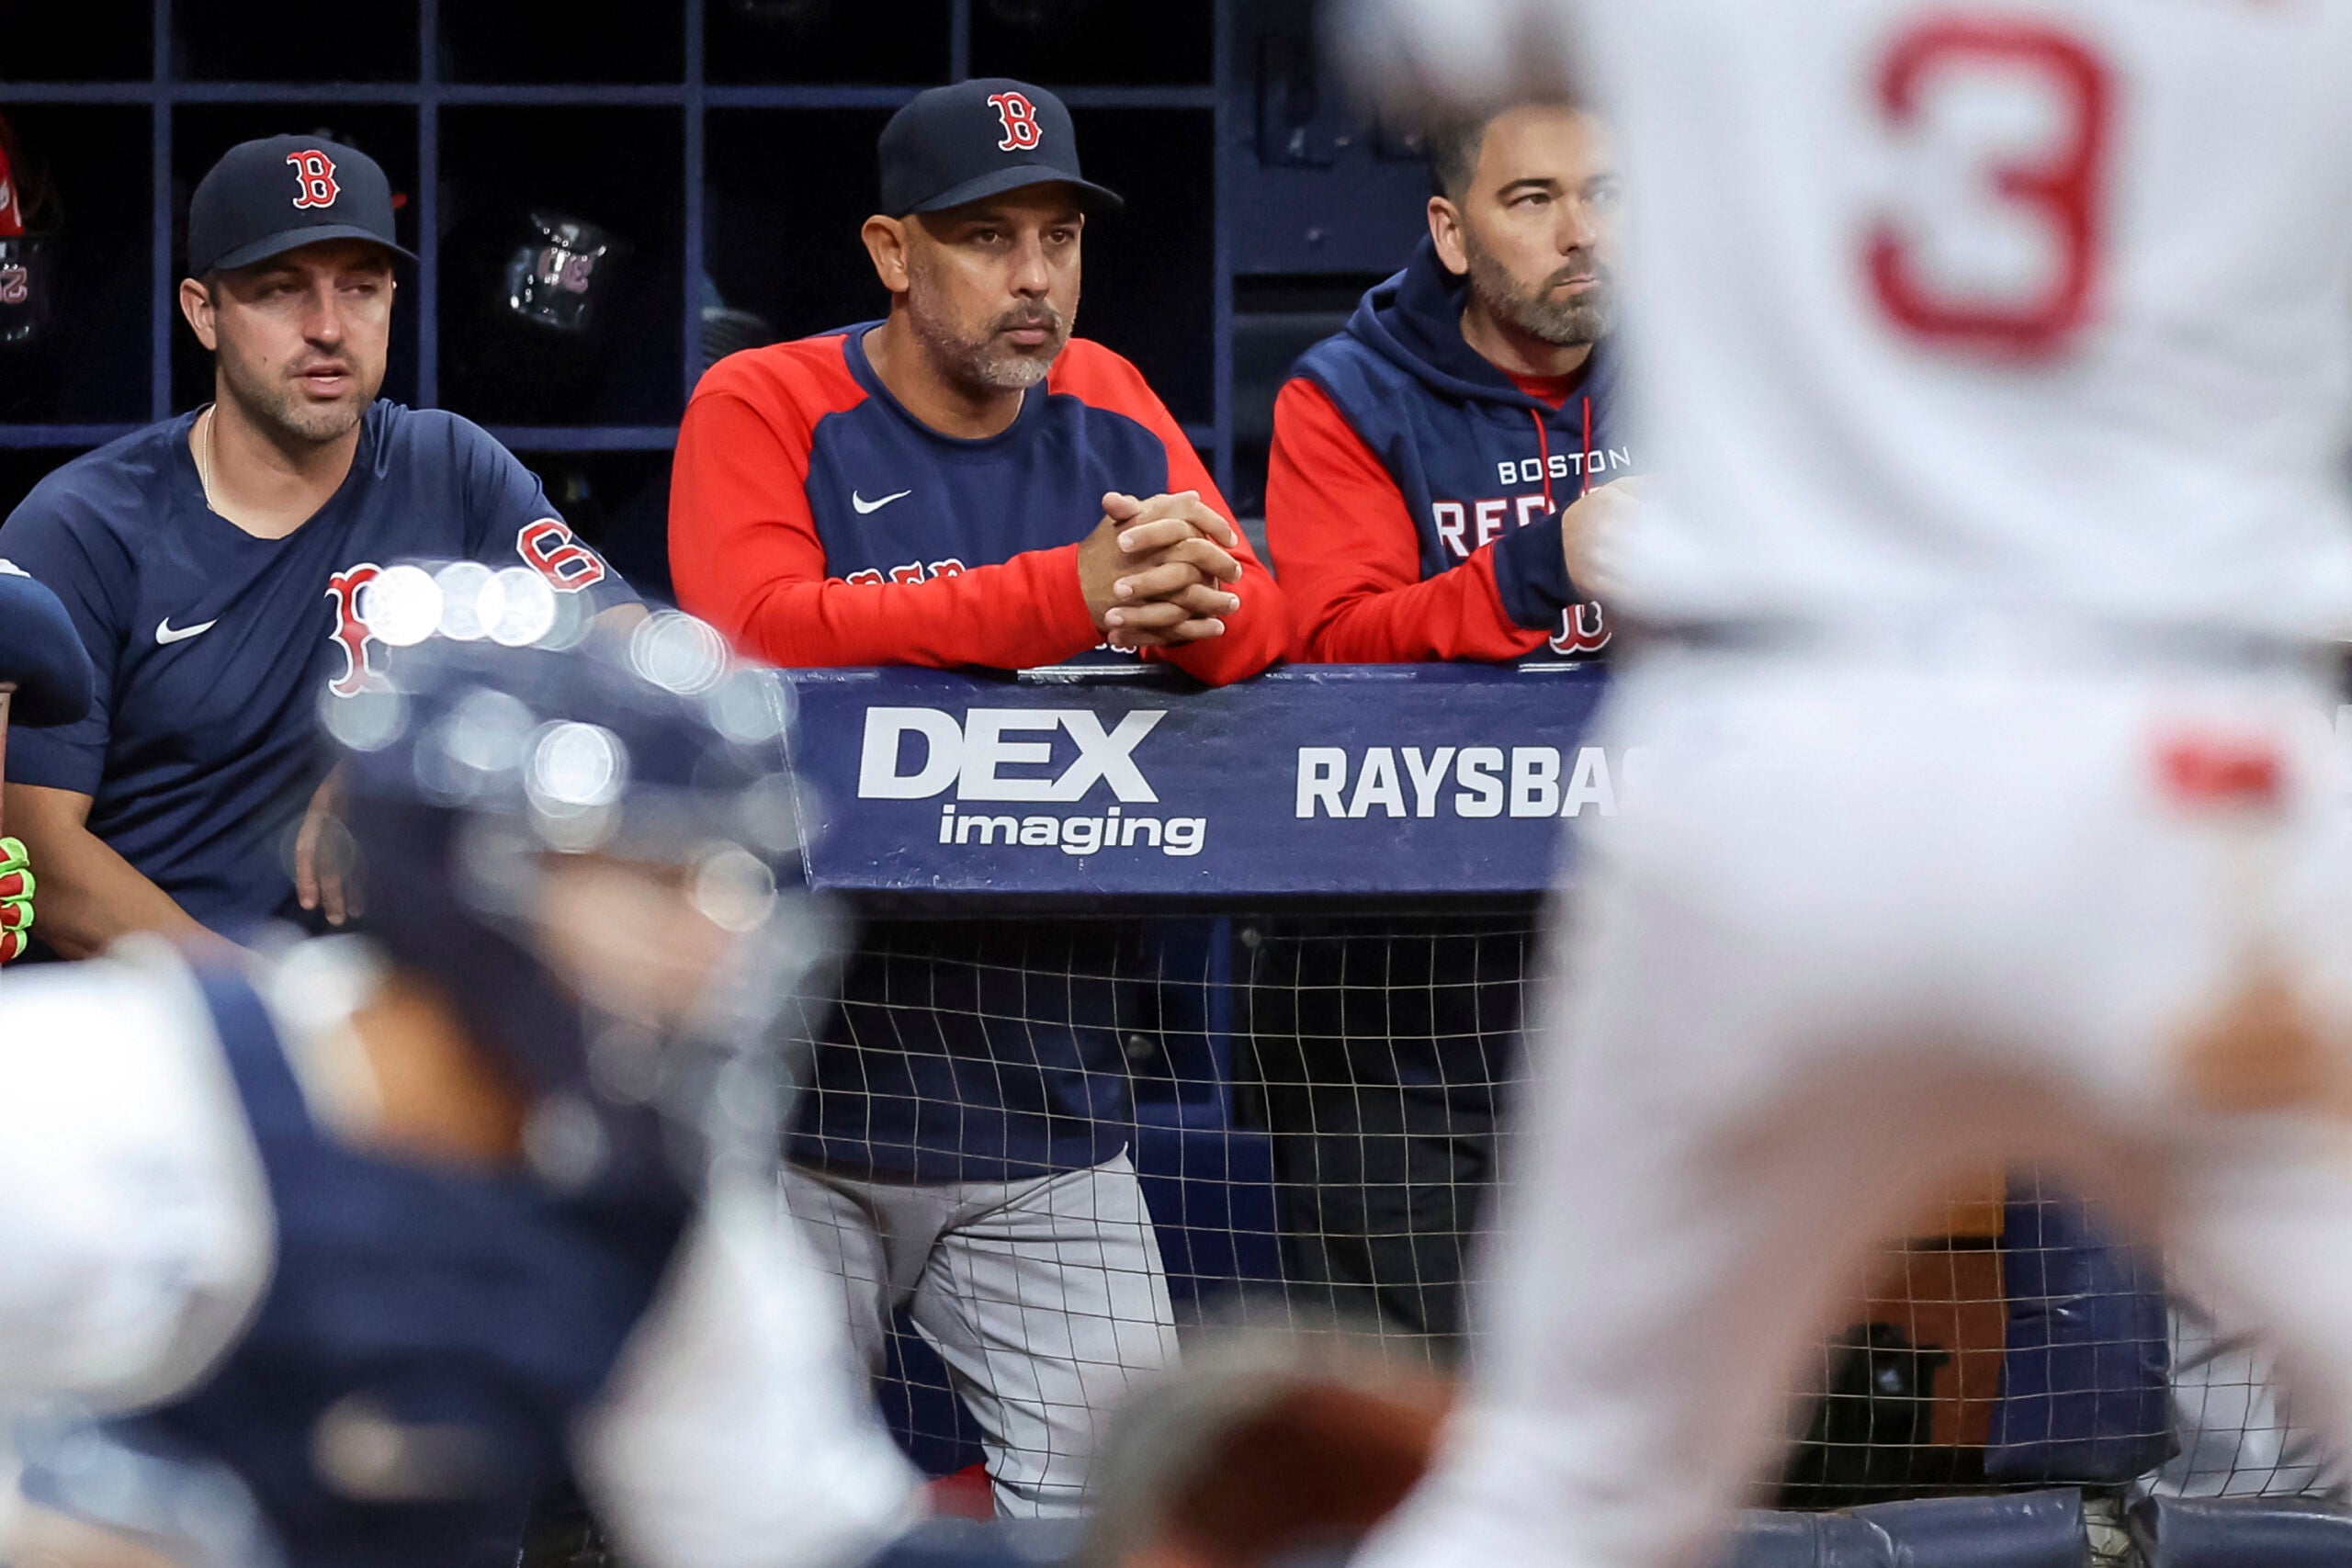 A weary Alex Cora looks on the from the Red Sox dugout as his team is swept once again by the Rays.